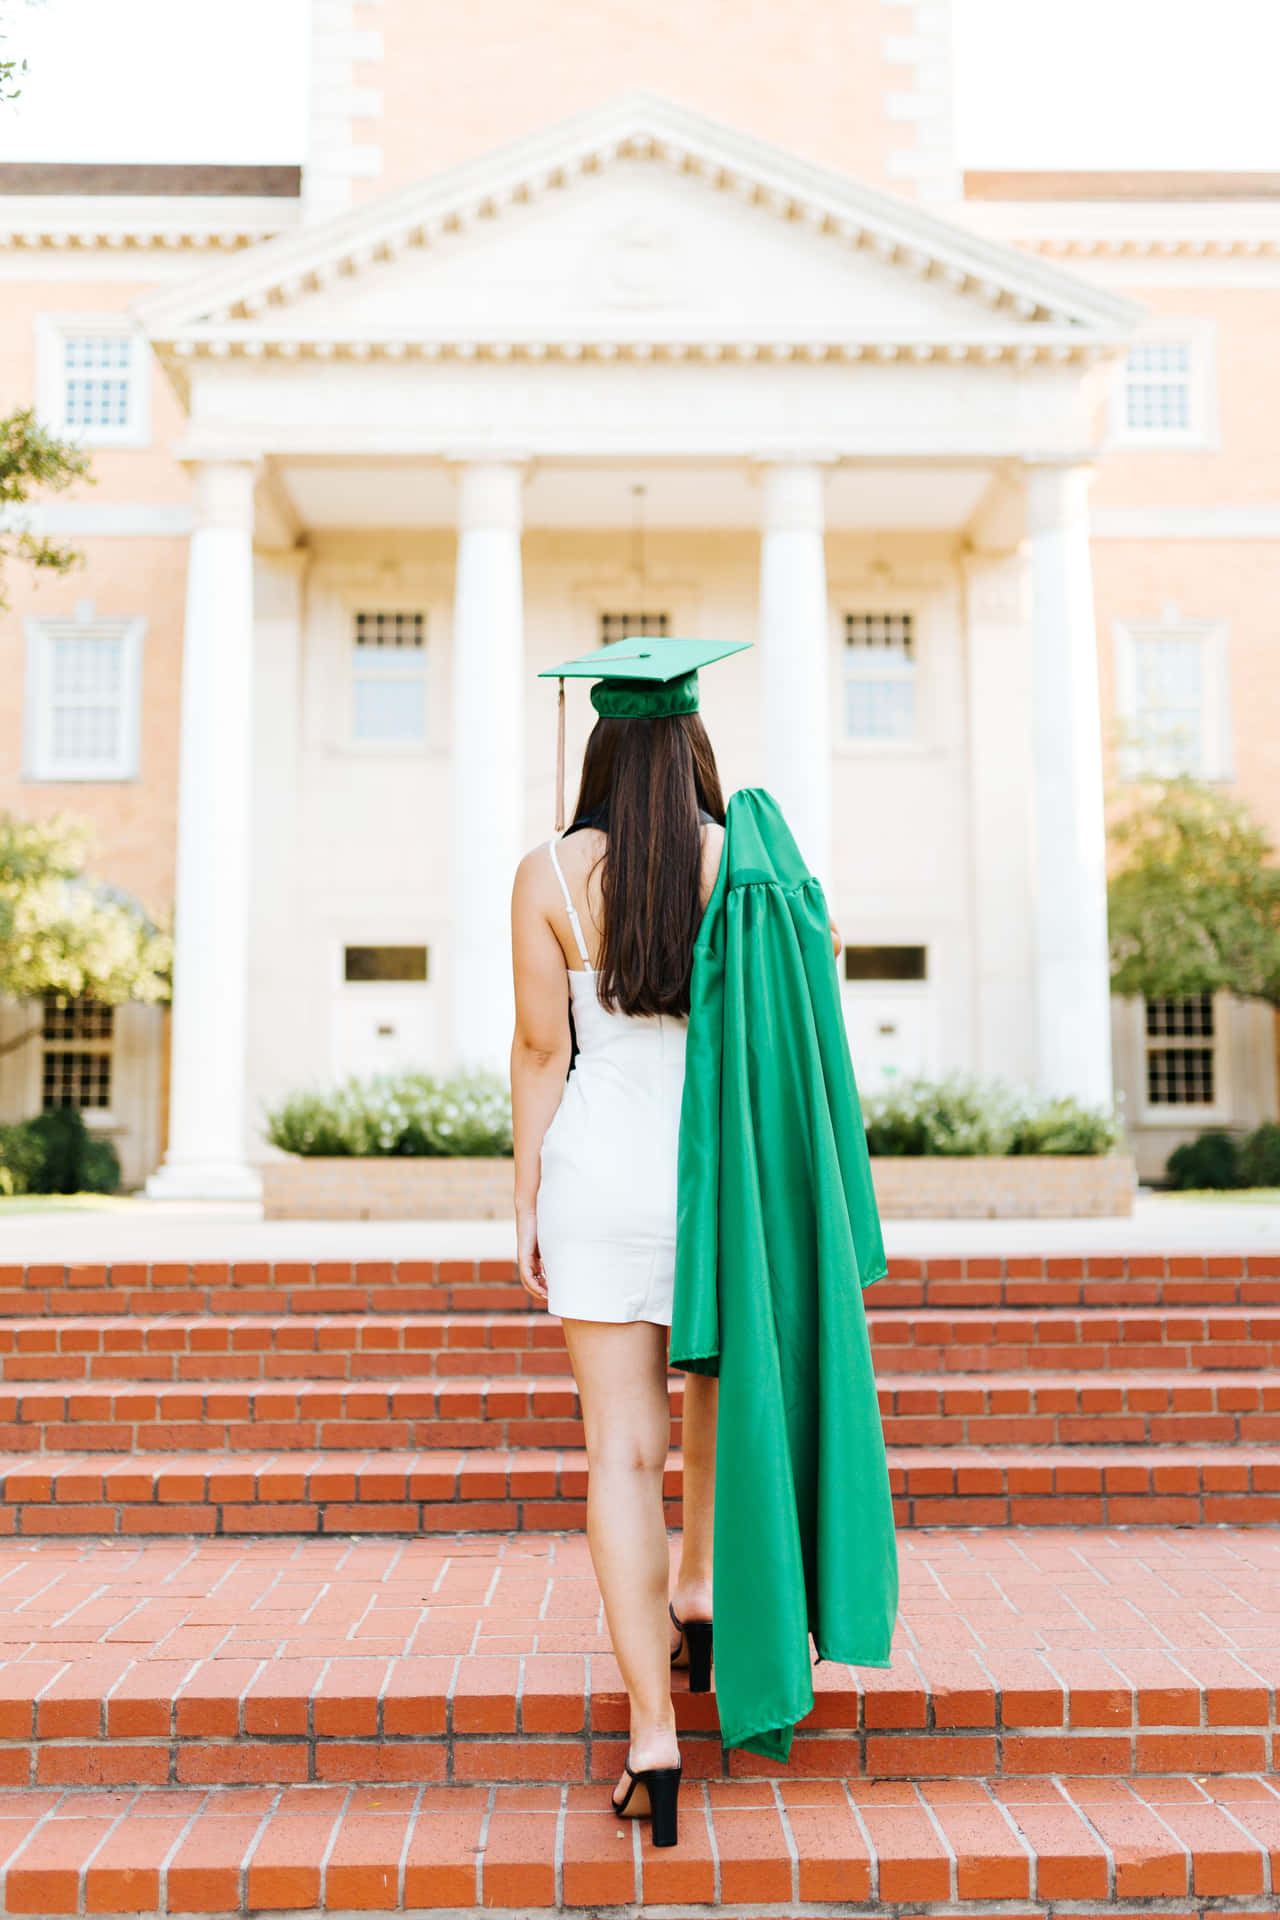 A Woman In A Green Gown Walking Down Steps